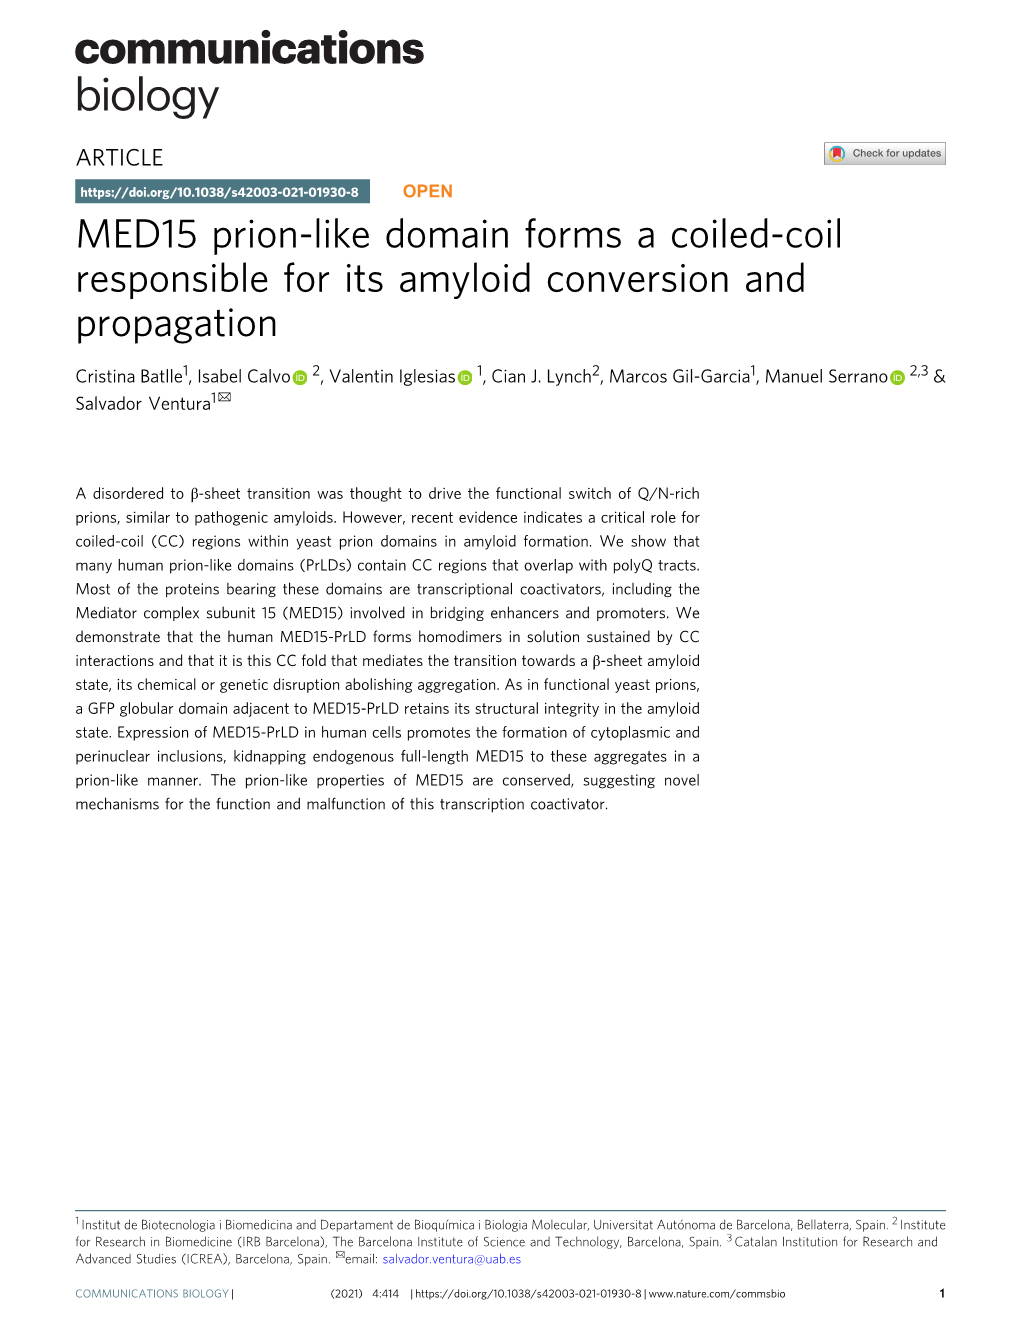 MED15 Prion-Like Domain Forms a Coiled-Coil Responsible for Its Amyloid Conversion and Propagation